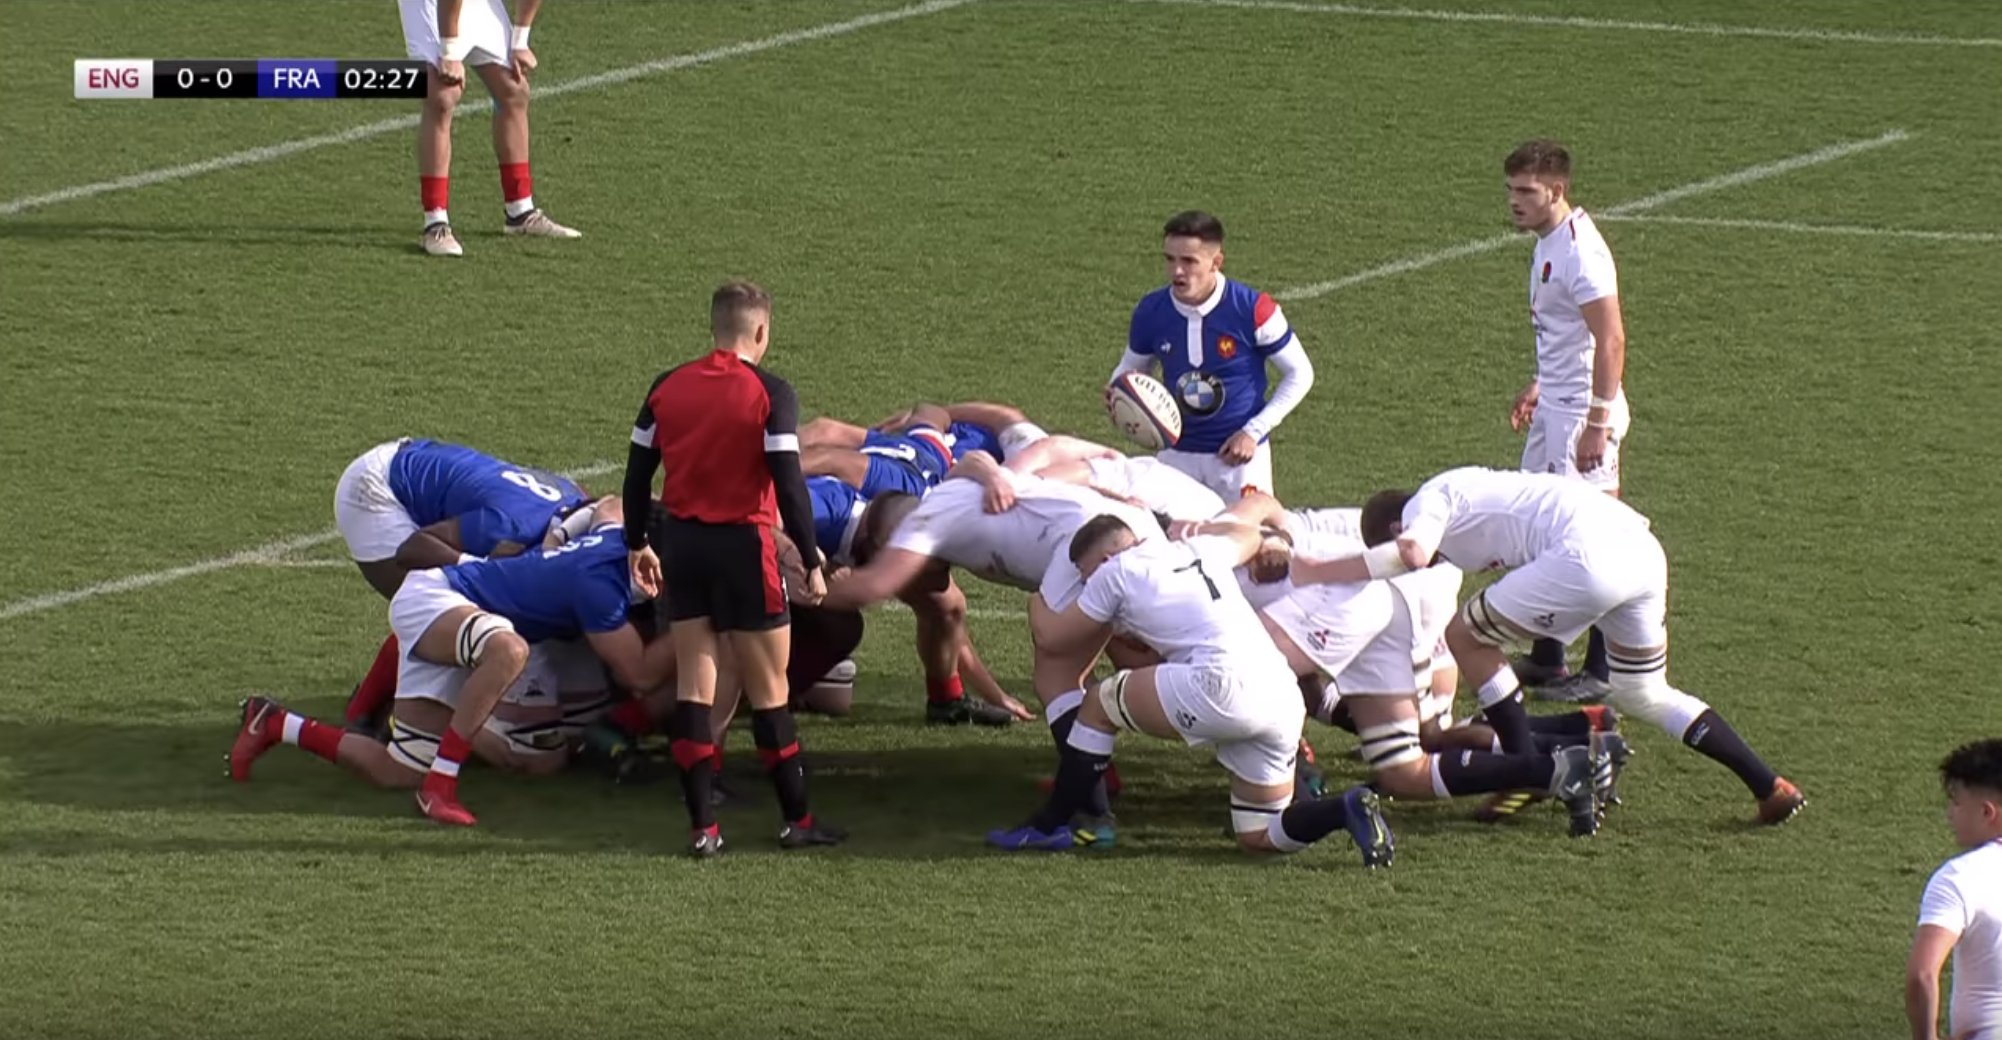 DESTRUCTION: England Under 20's scrum obliterates the French for 80 minutes